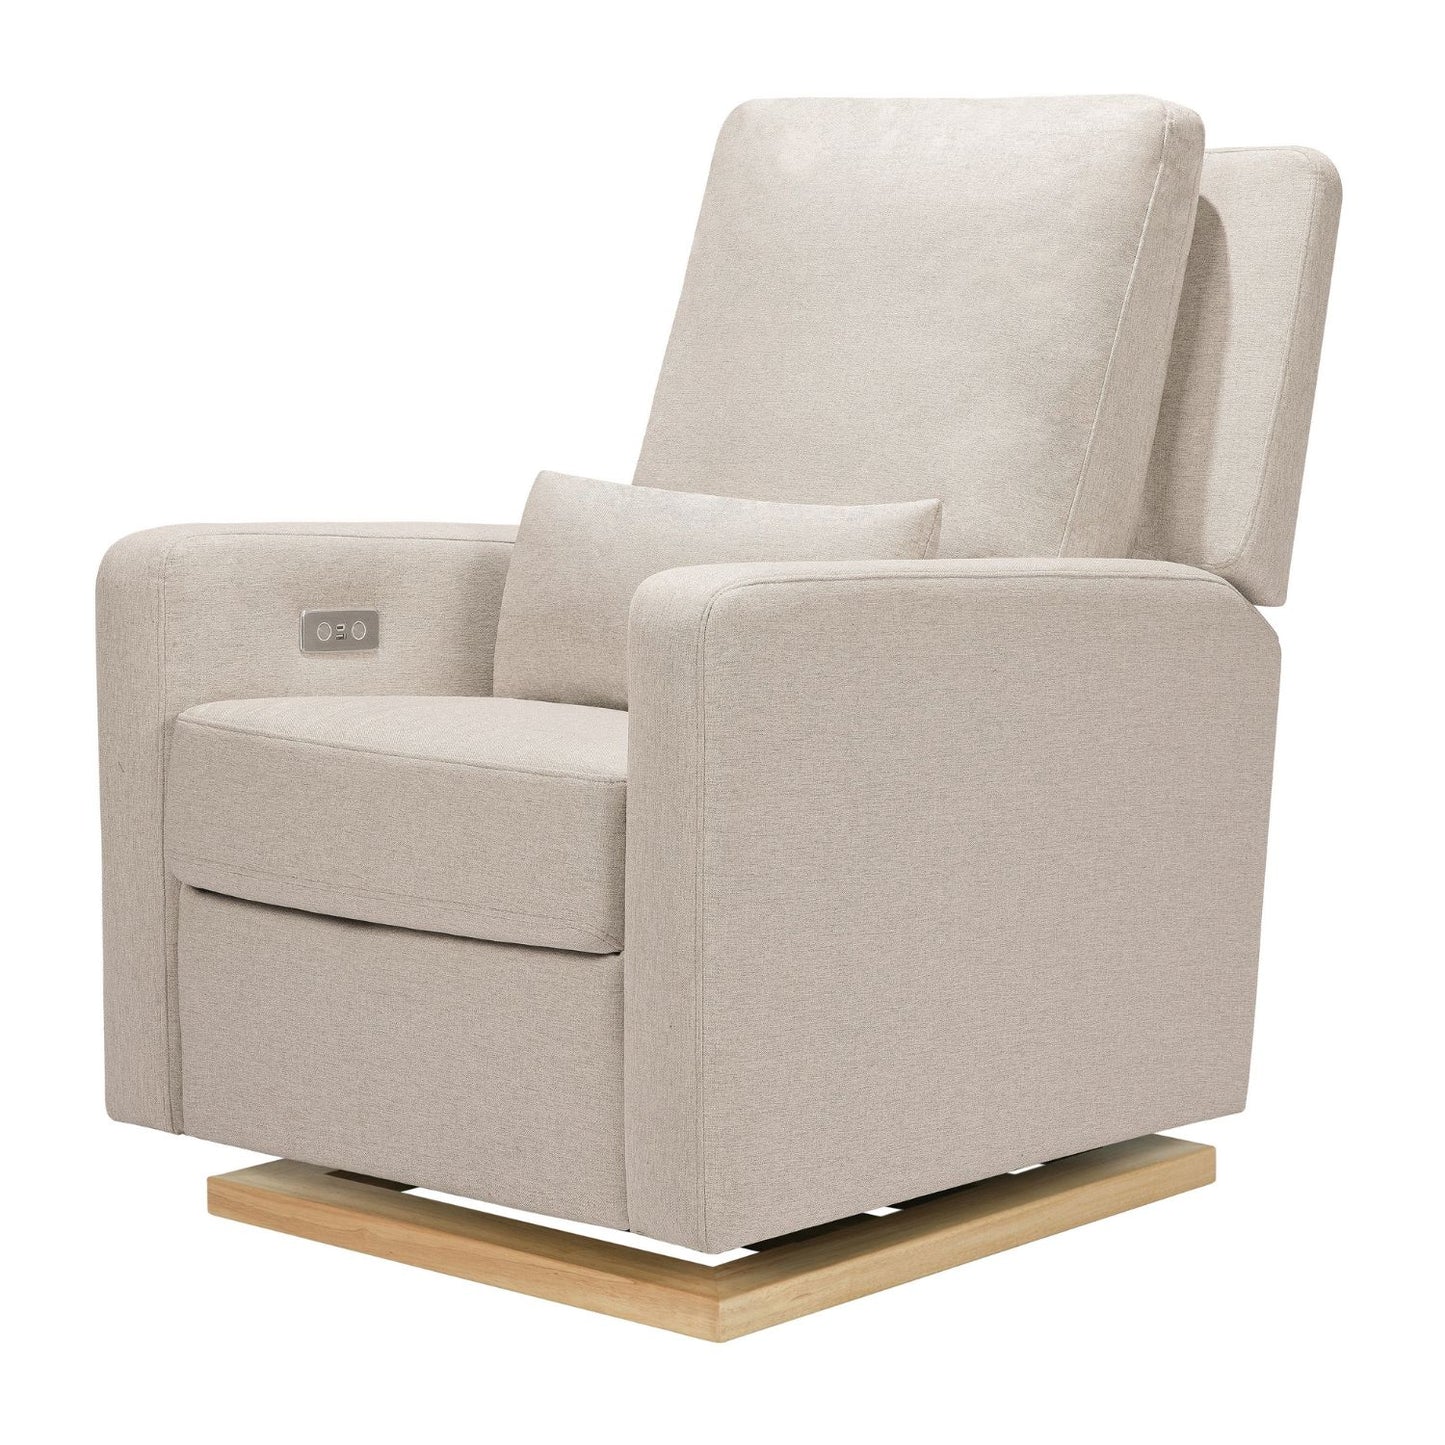 Babyletto Sigi Electronic Recliner and Glider with USB Port - Performance Beach Eco-Weave with Light Wood Base